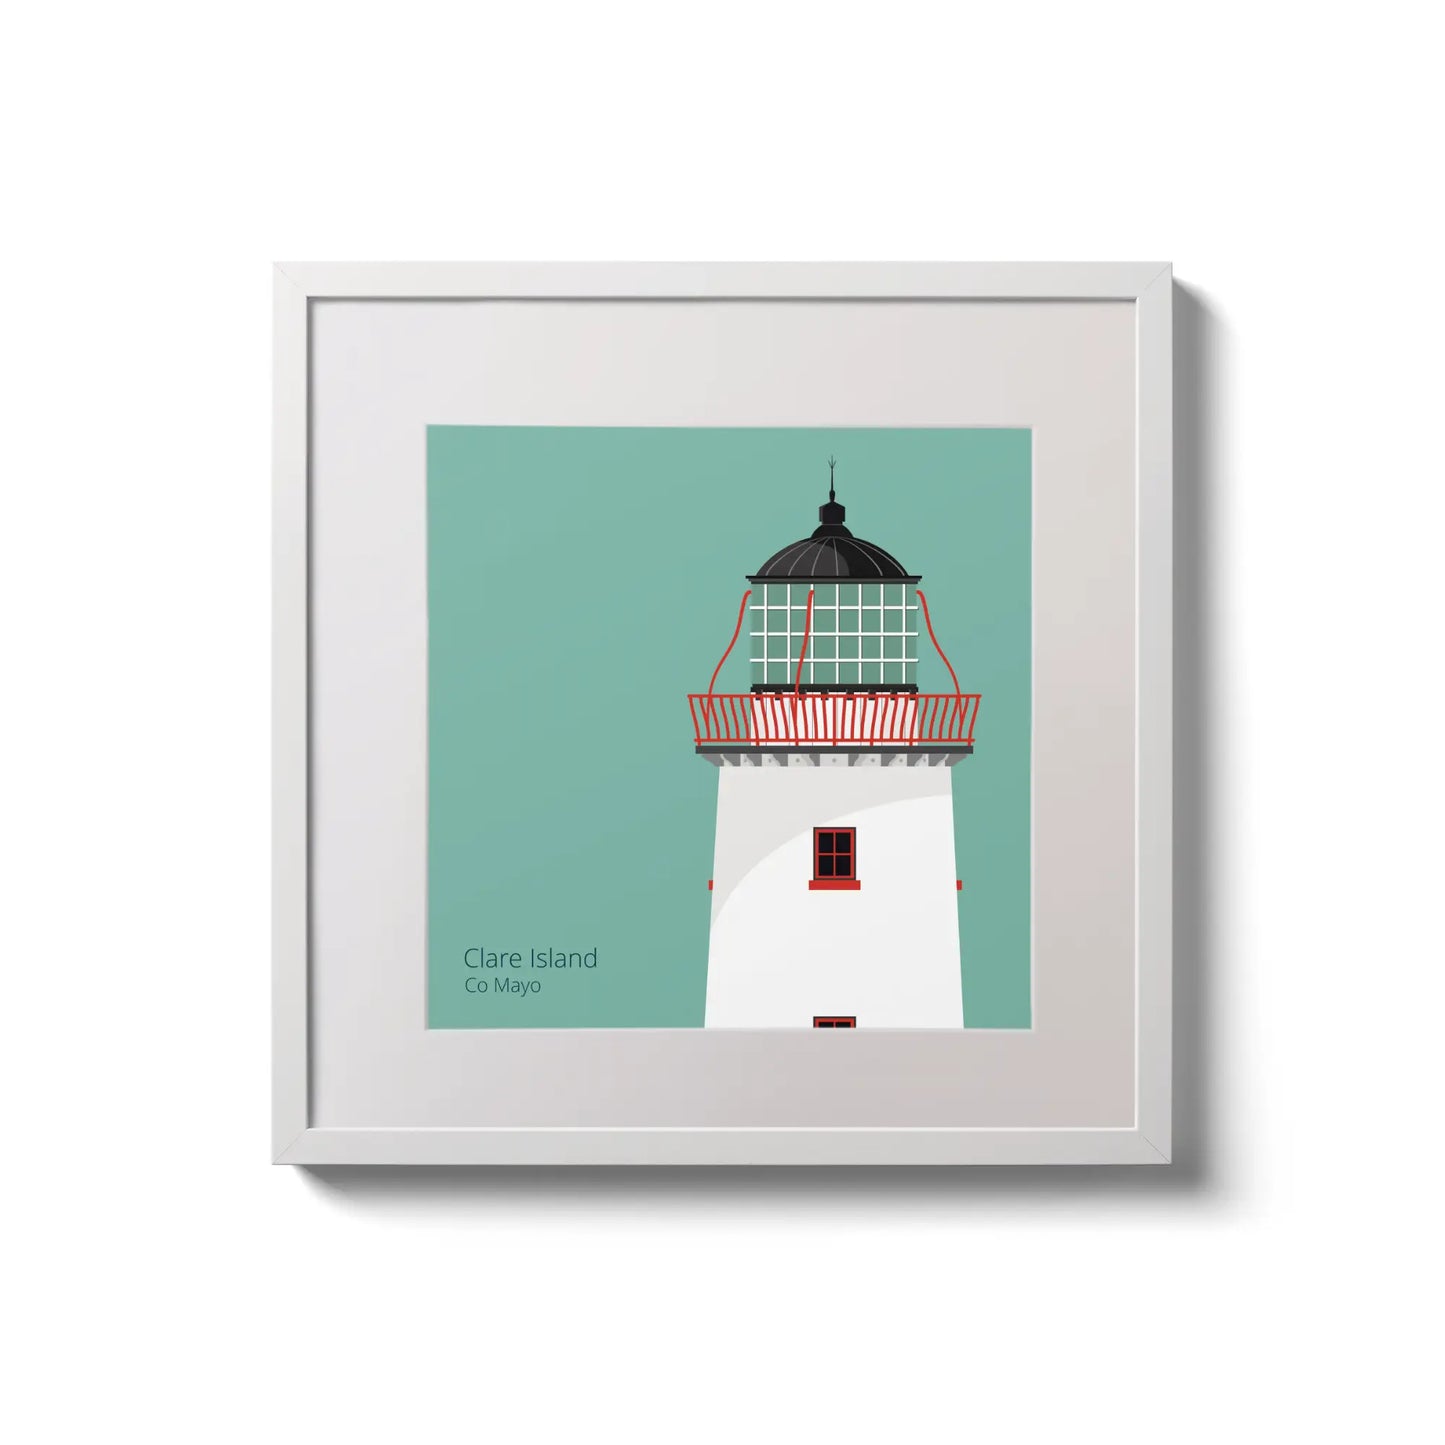 Illustration of Clare Island lighthouse on an ocean green background,  in a white square frame measuring 20x20cm.